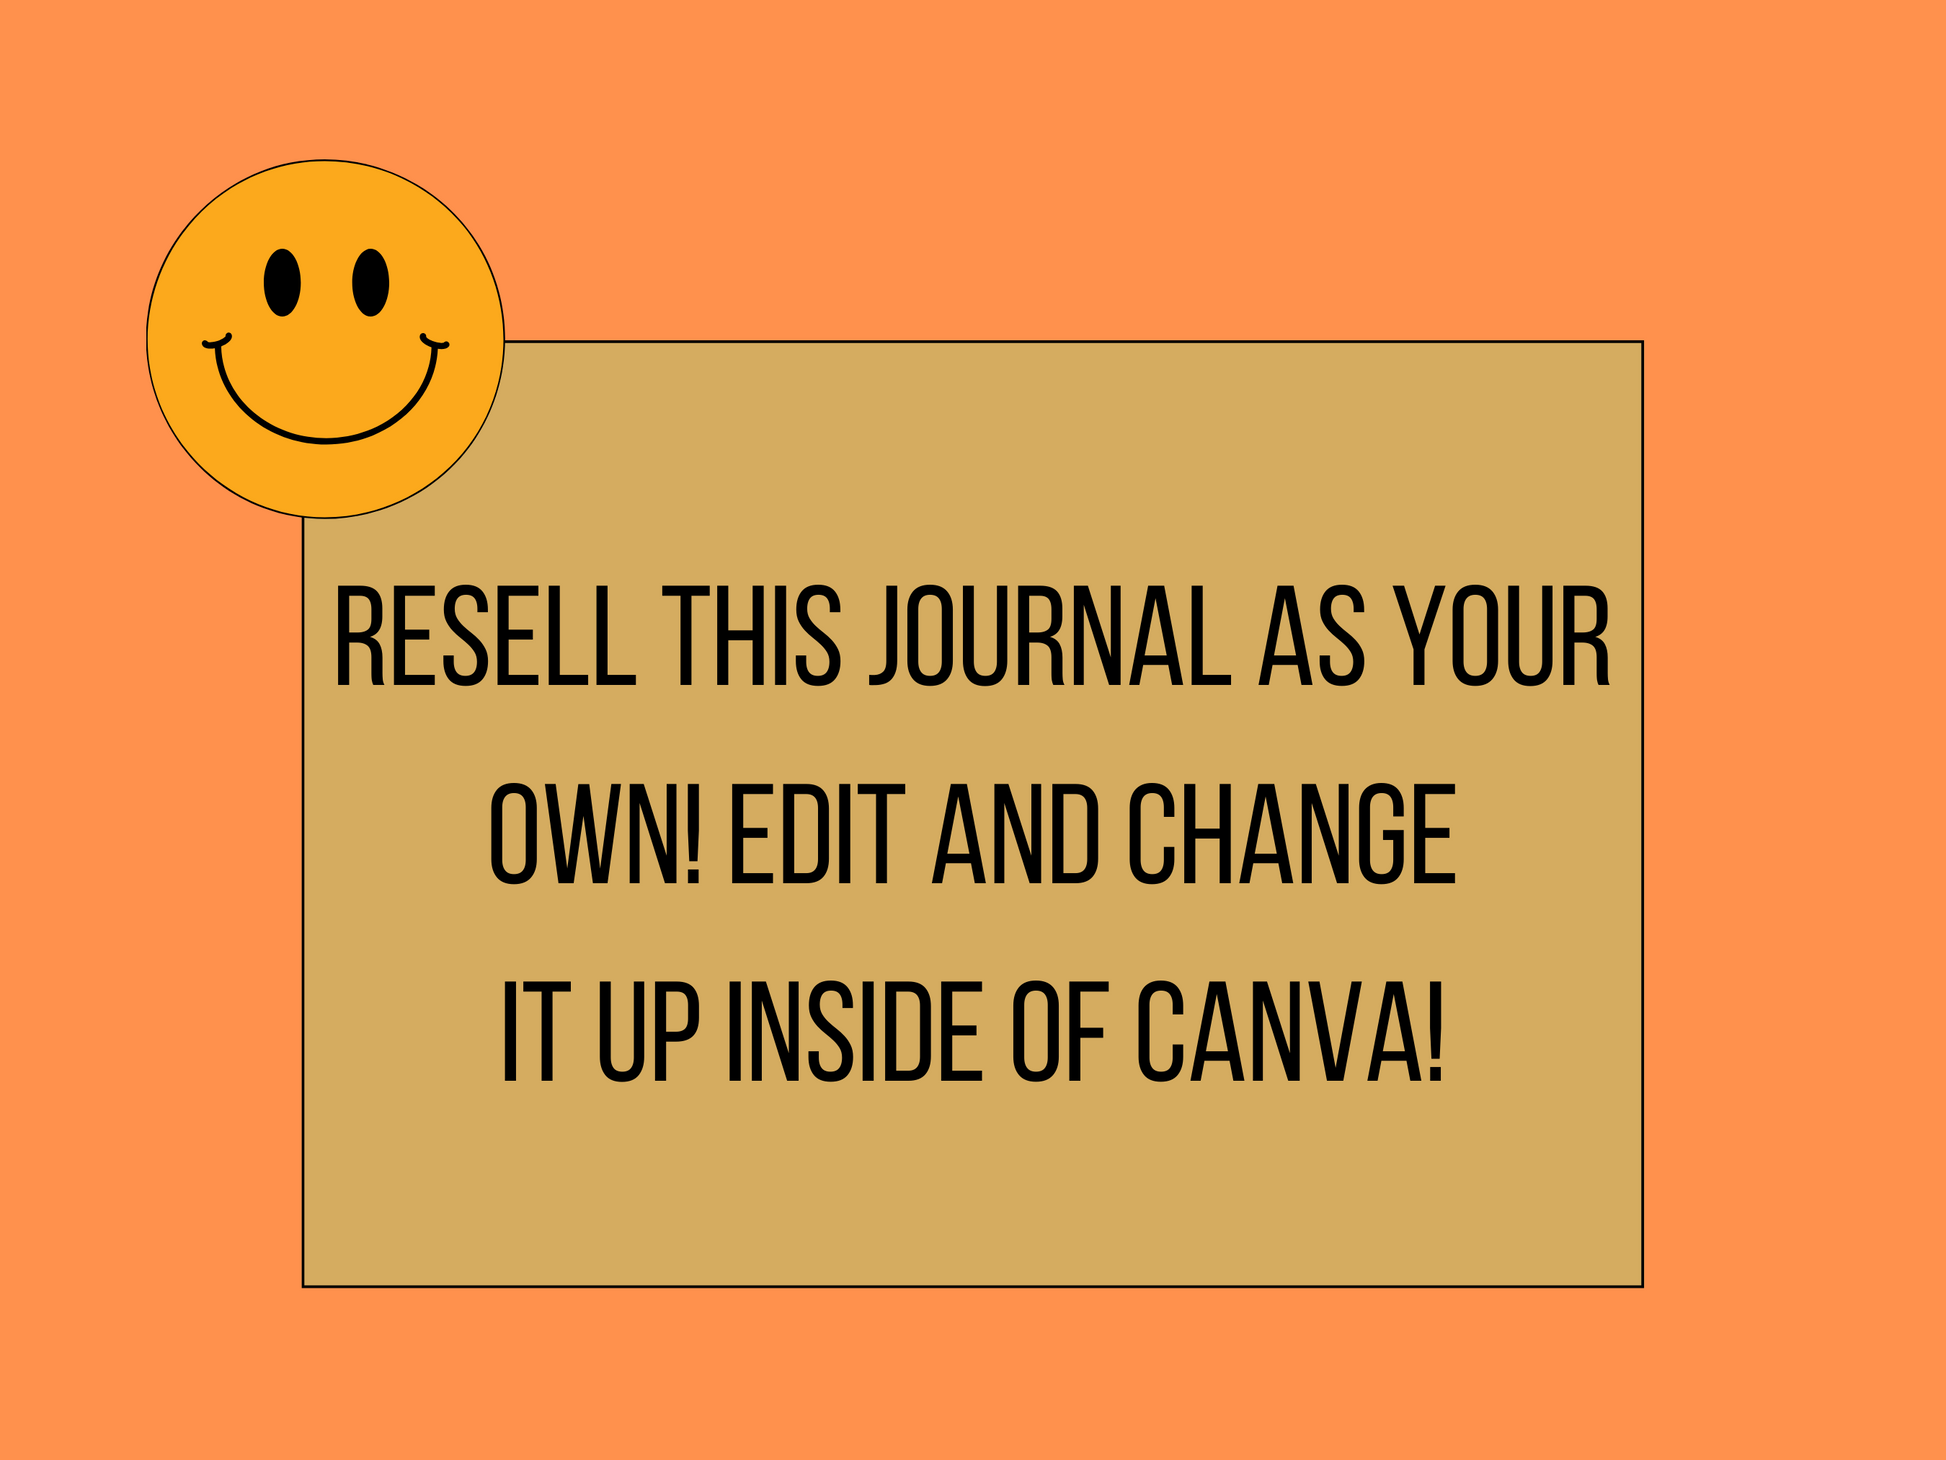 resell journal as your own